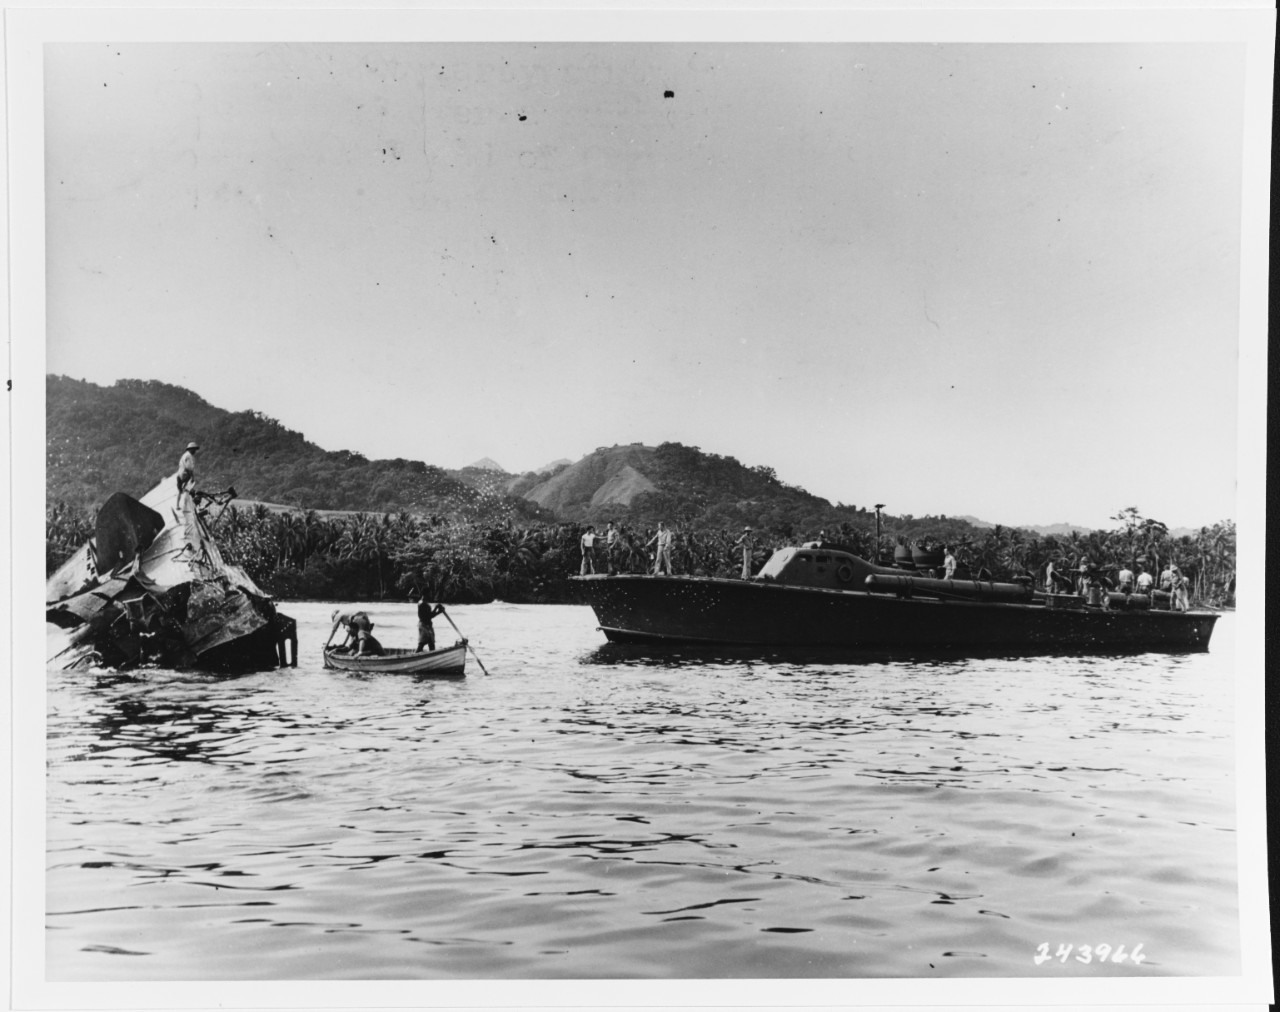 I-1 (Japanese SS, 1924) is examined by Army Intelligence personnel as USS PT-65 stands by, February 11, 1943